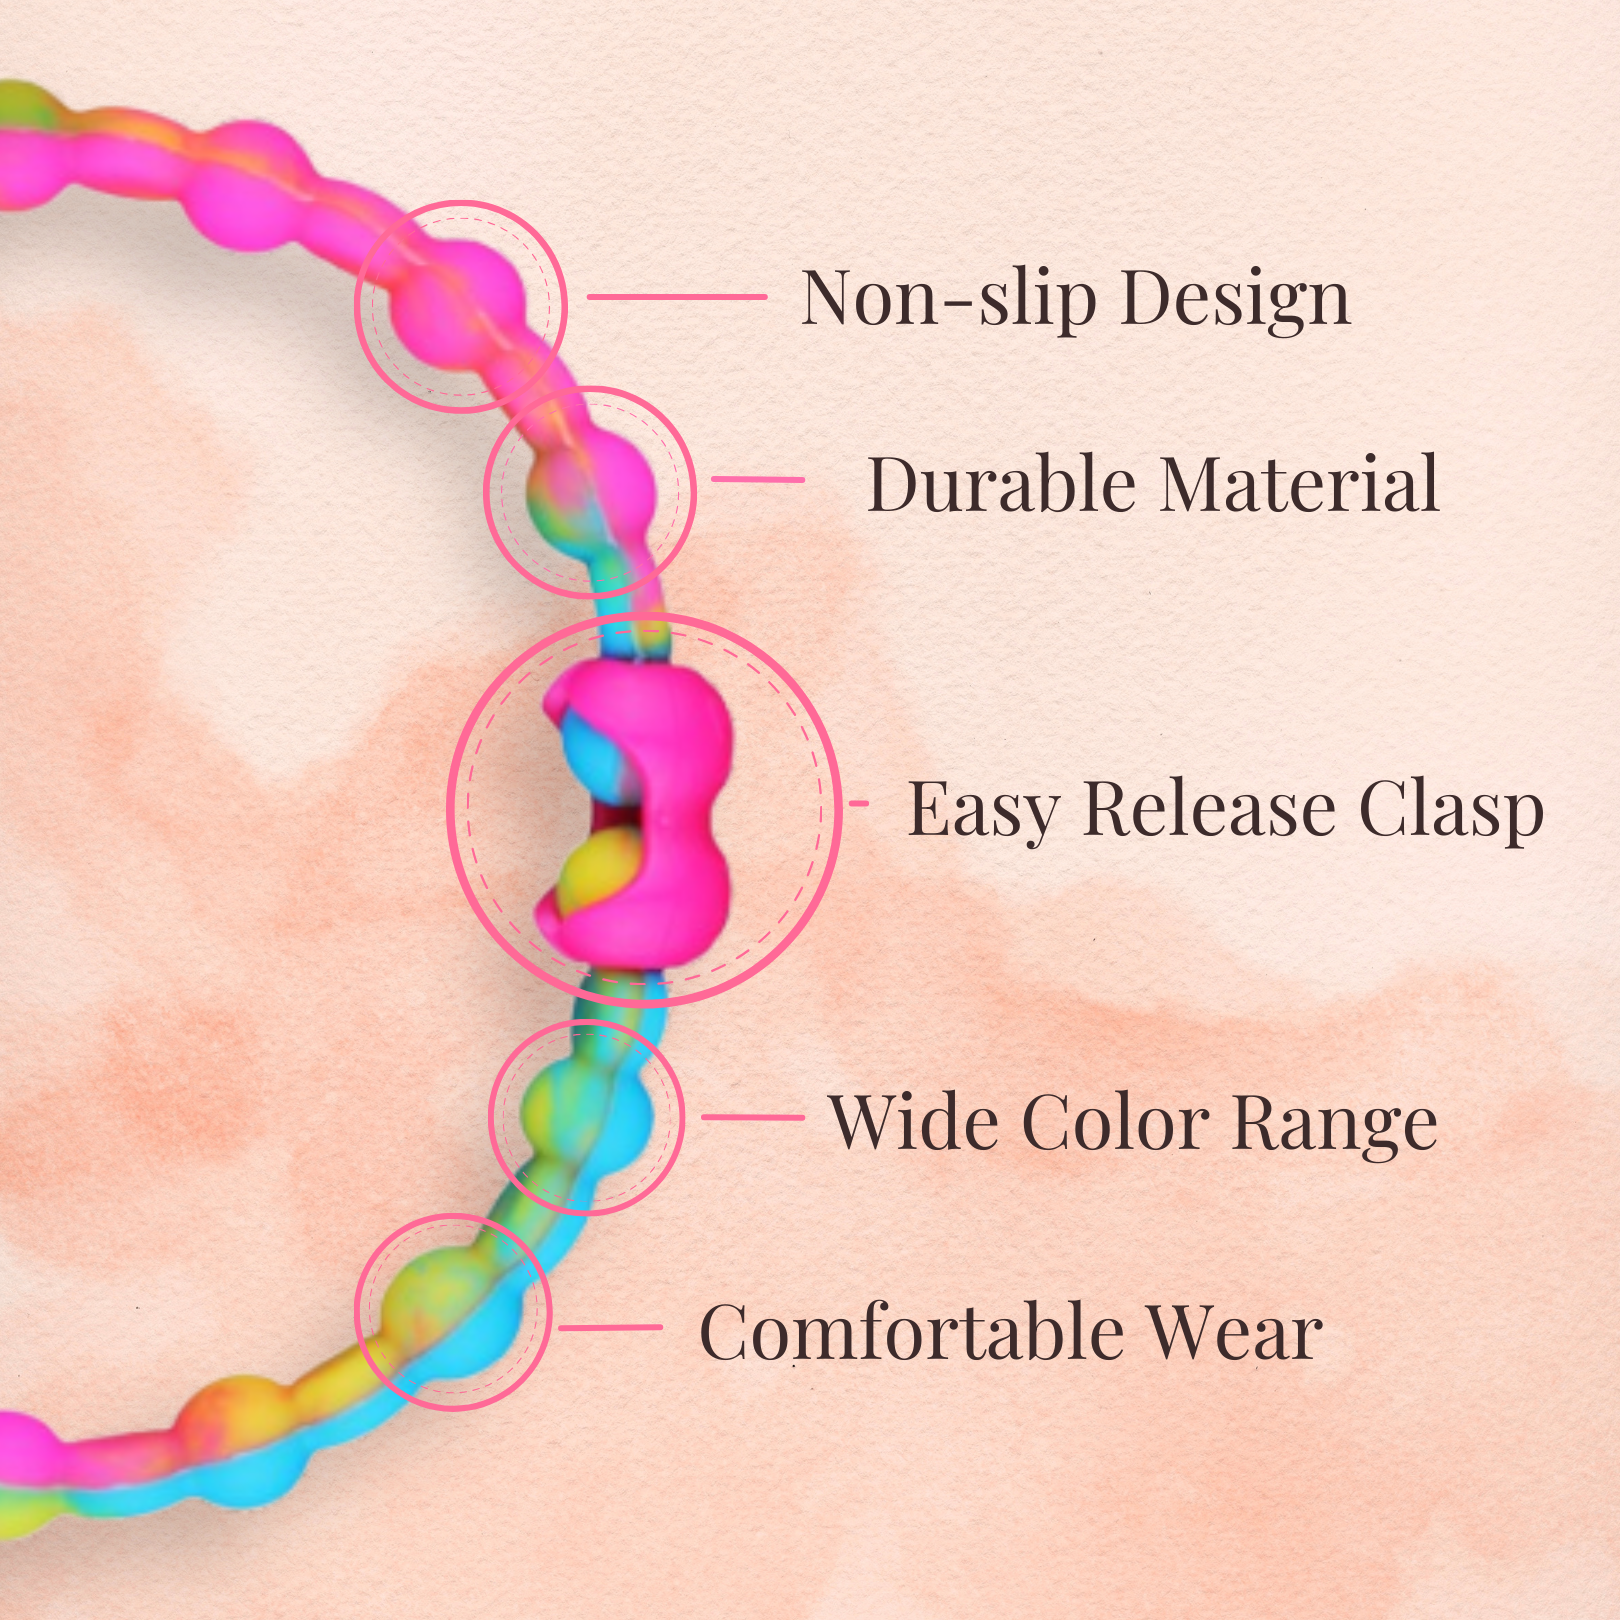 Autumn Harvest Pack PRO Hair Ties: Easy Release Adjustable for Every Hair Type PACK OF 8